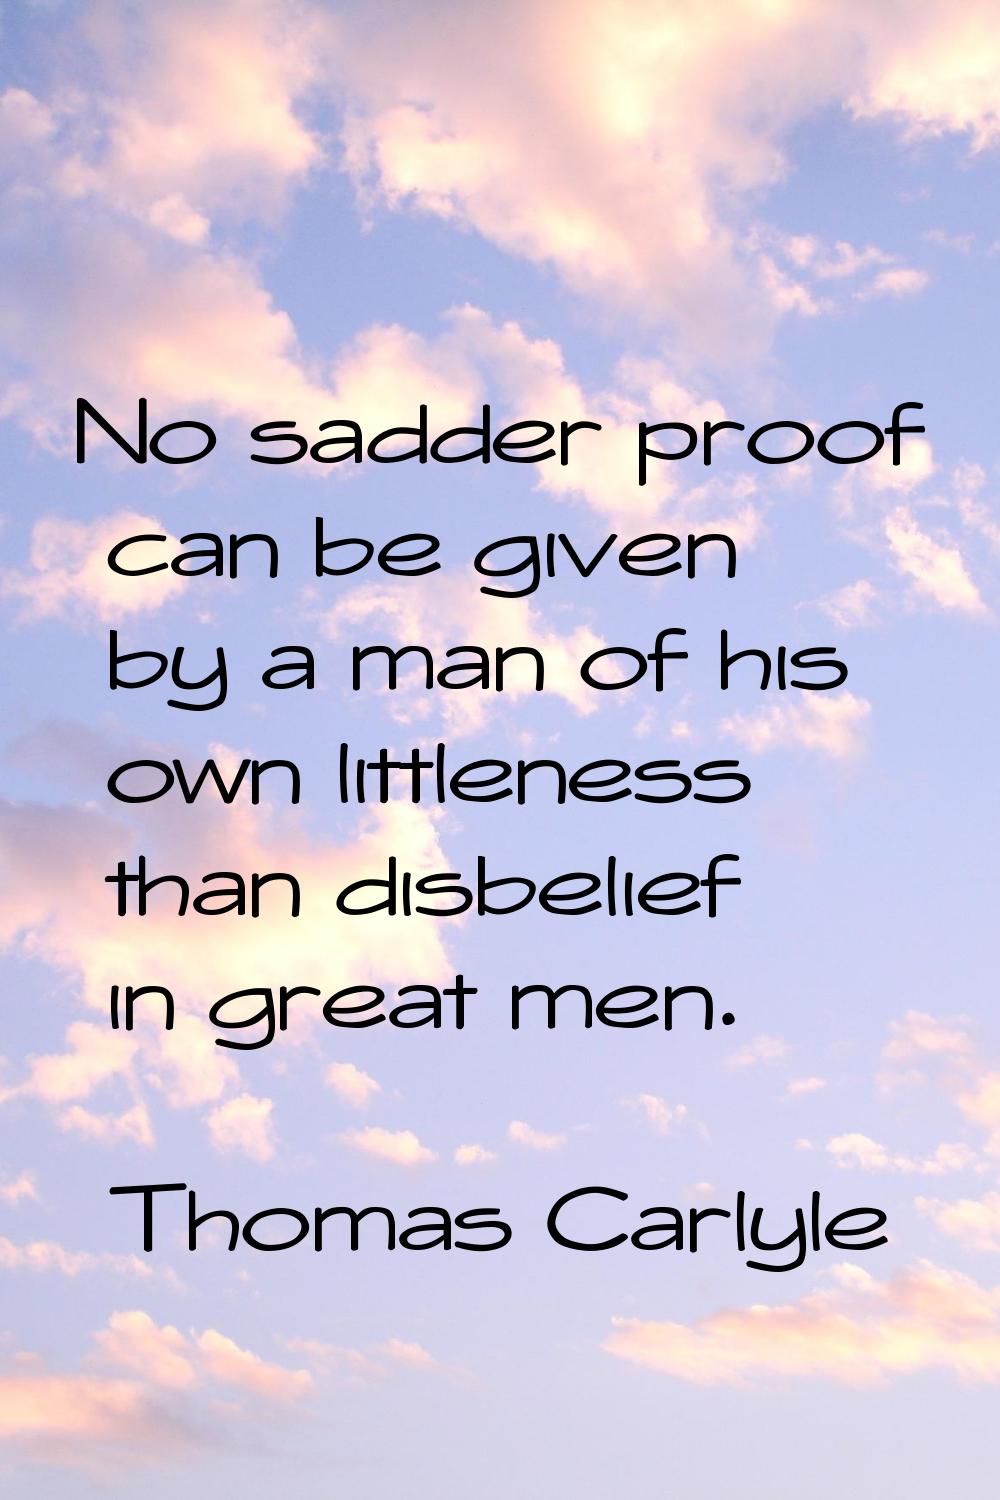 No sadder proof can be given by a man of his own littleness than disbelief in great men.